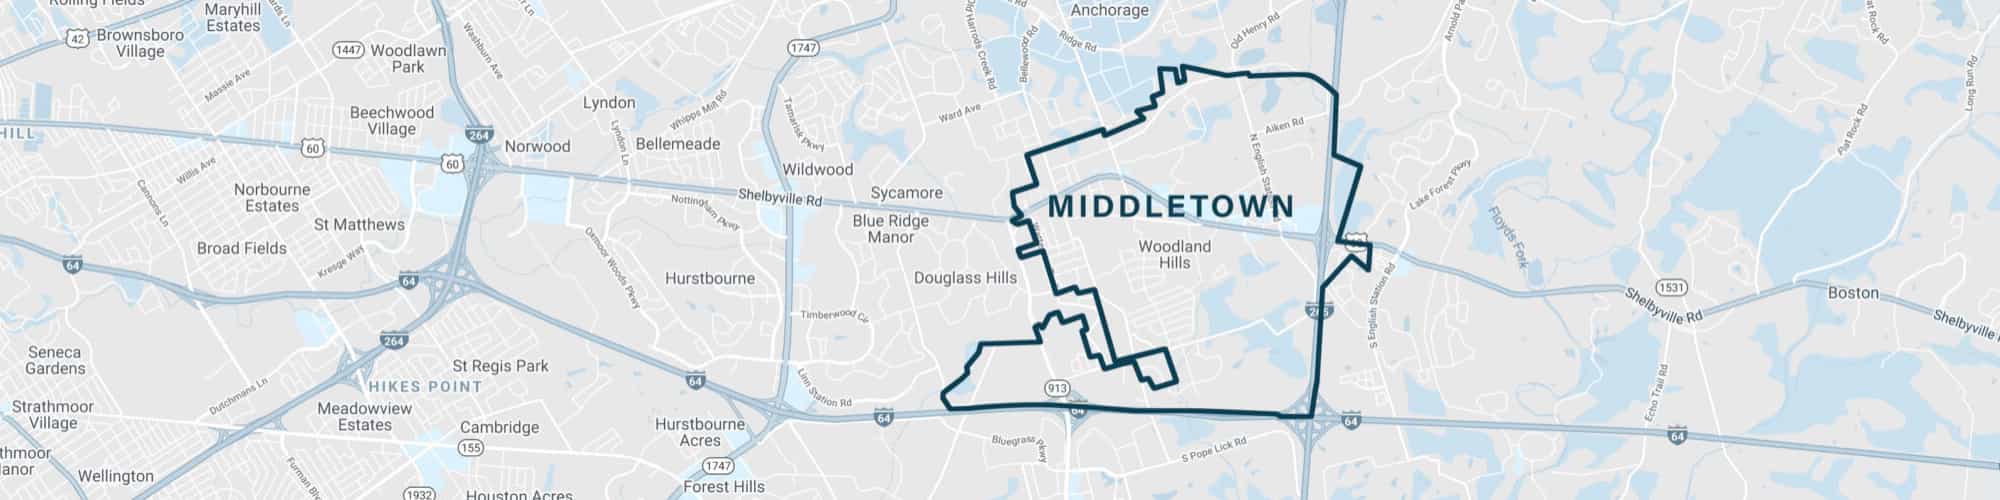 Middletown-map